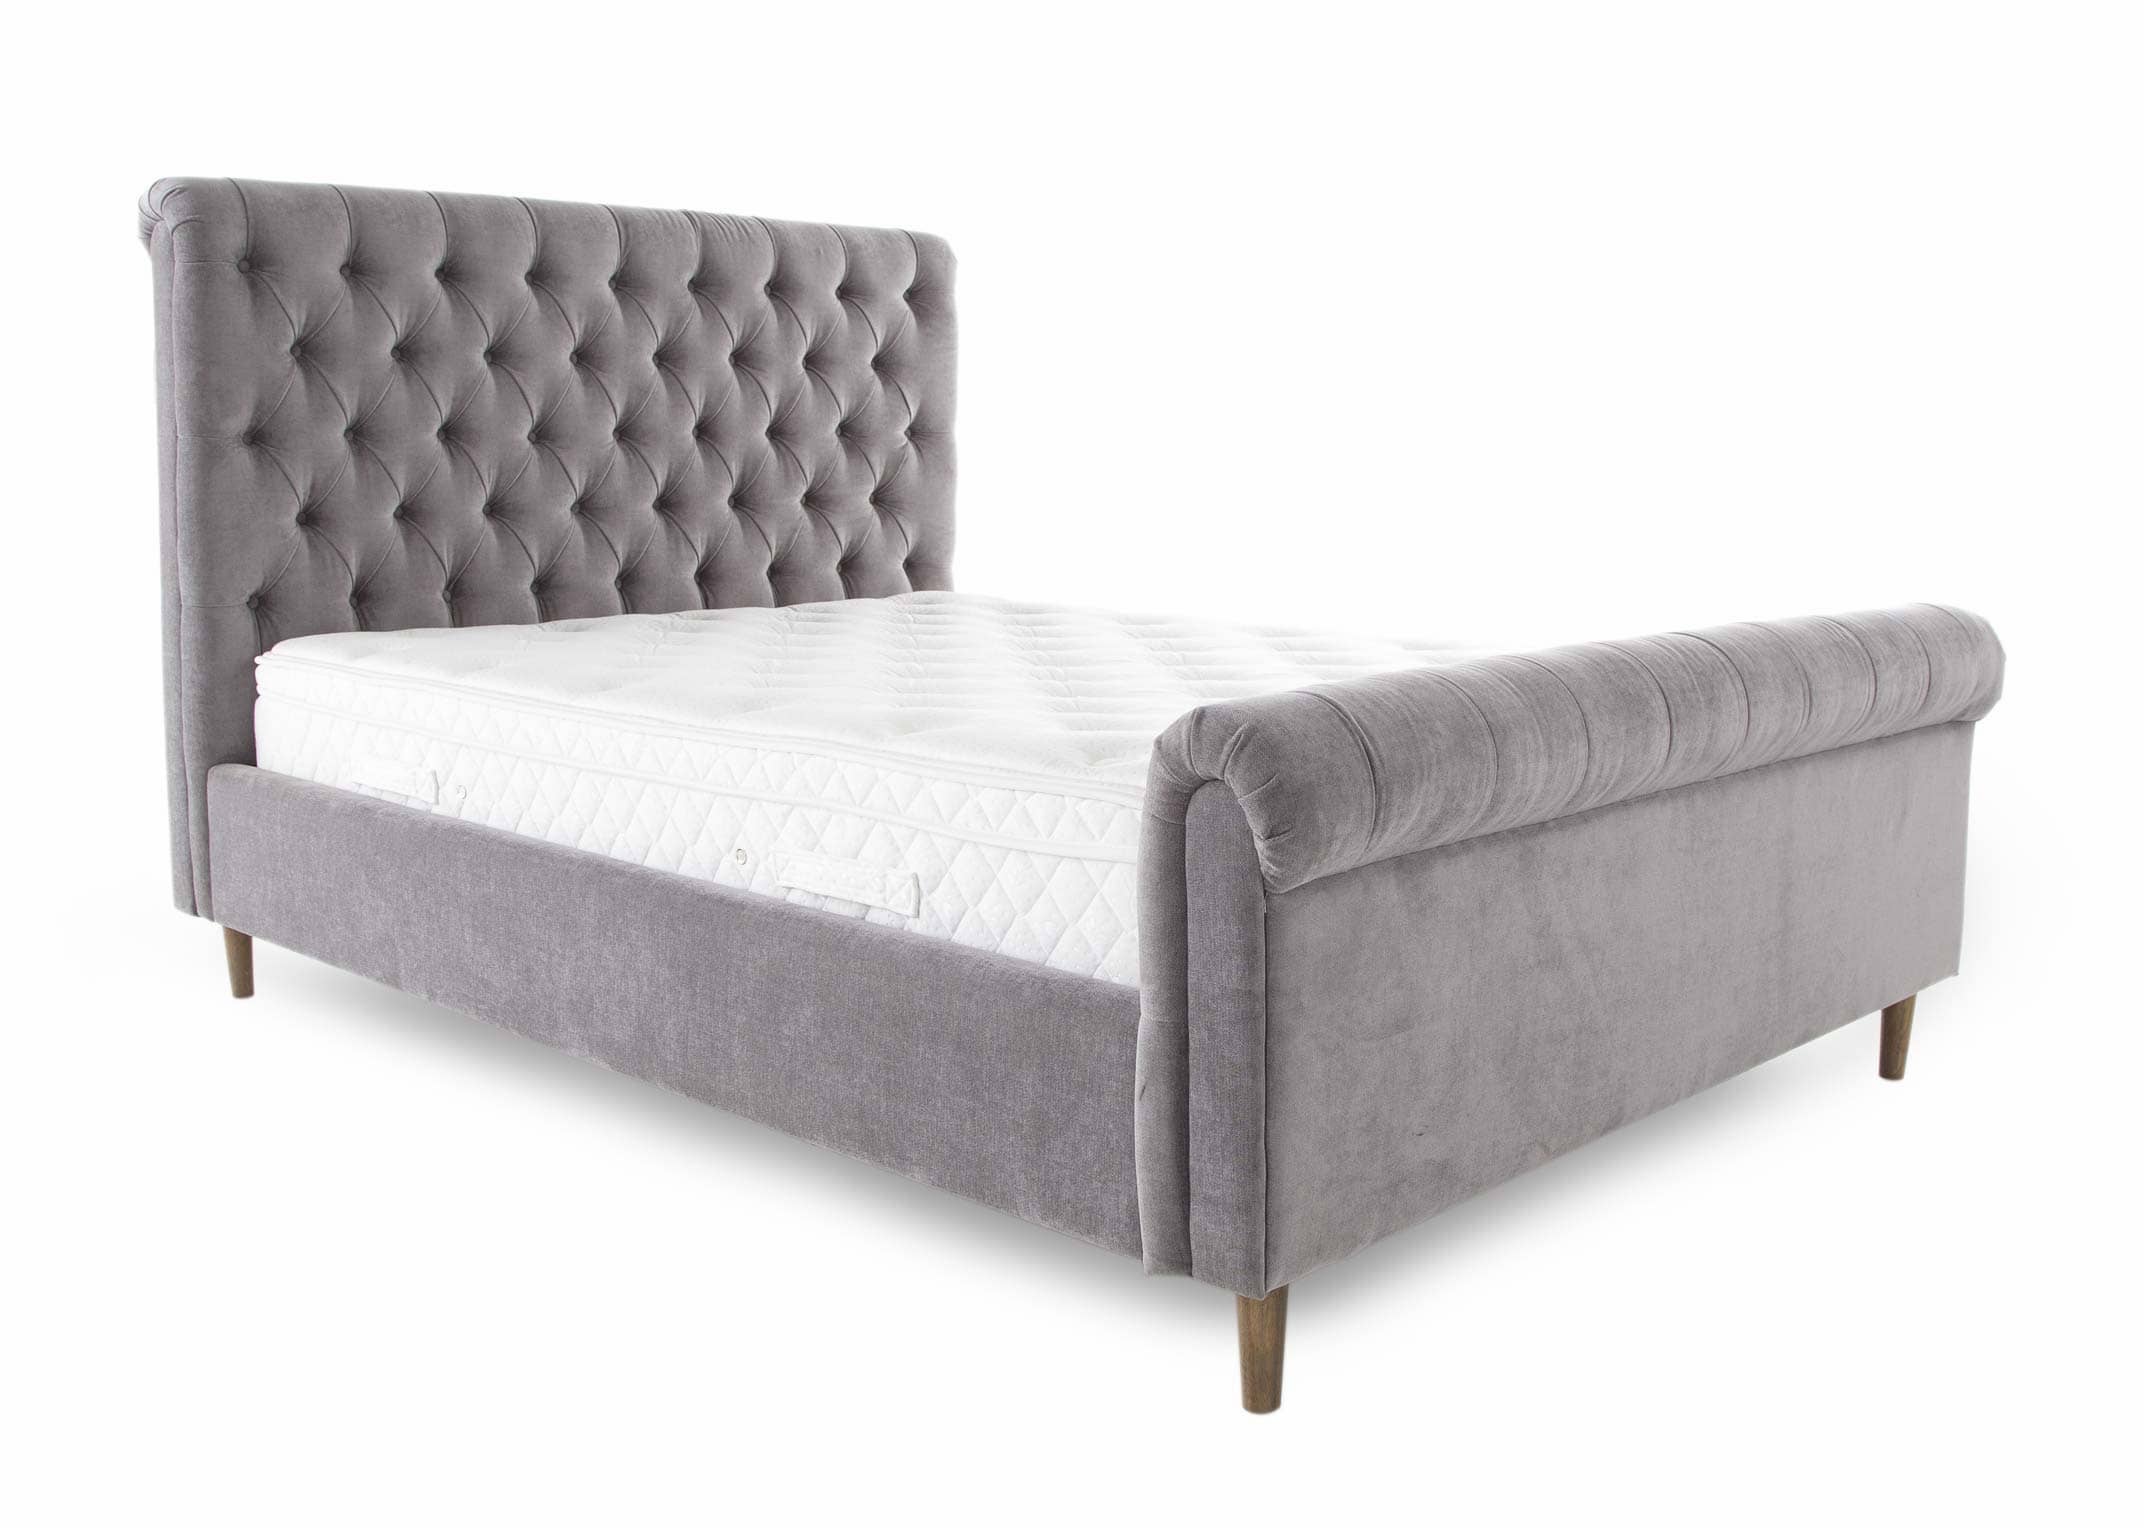 5ft Grey Fabric Bed Frame Sofia, Grey Fabric King Bed